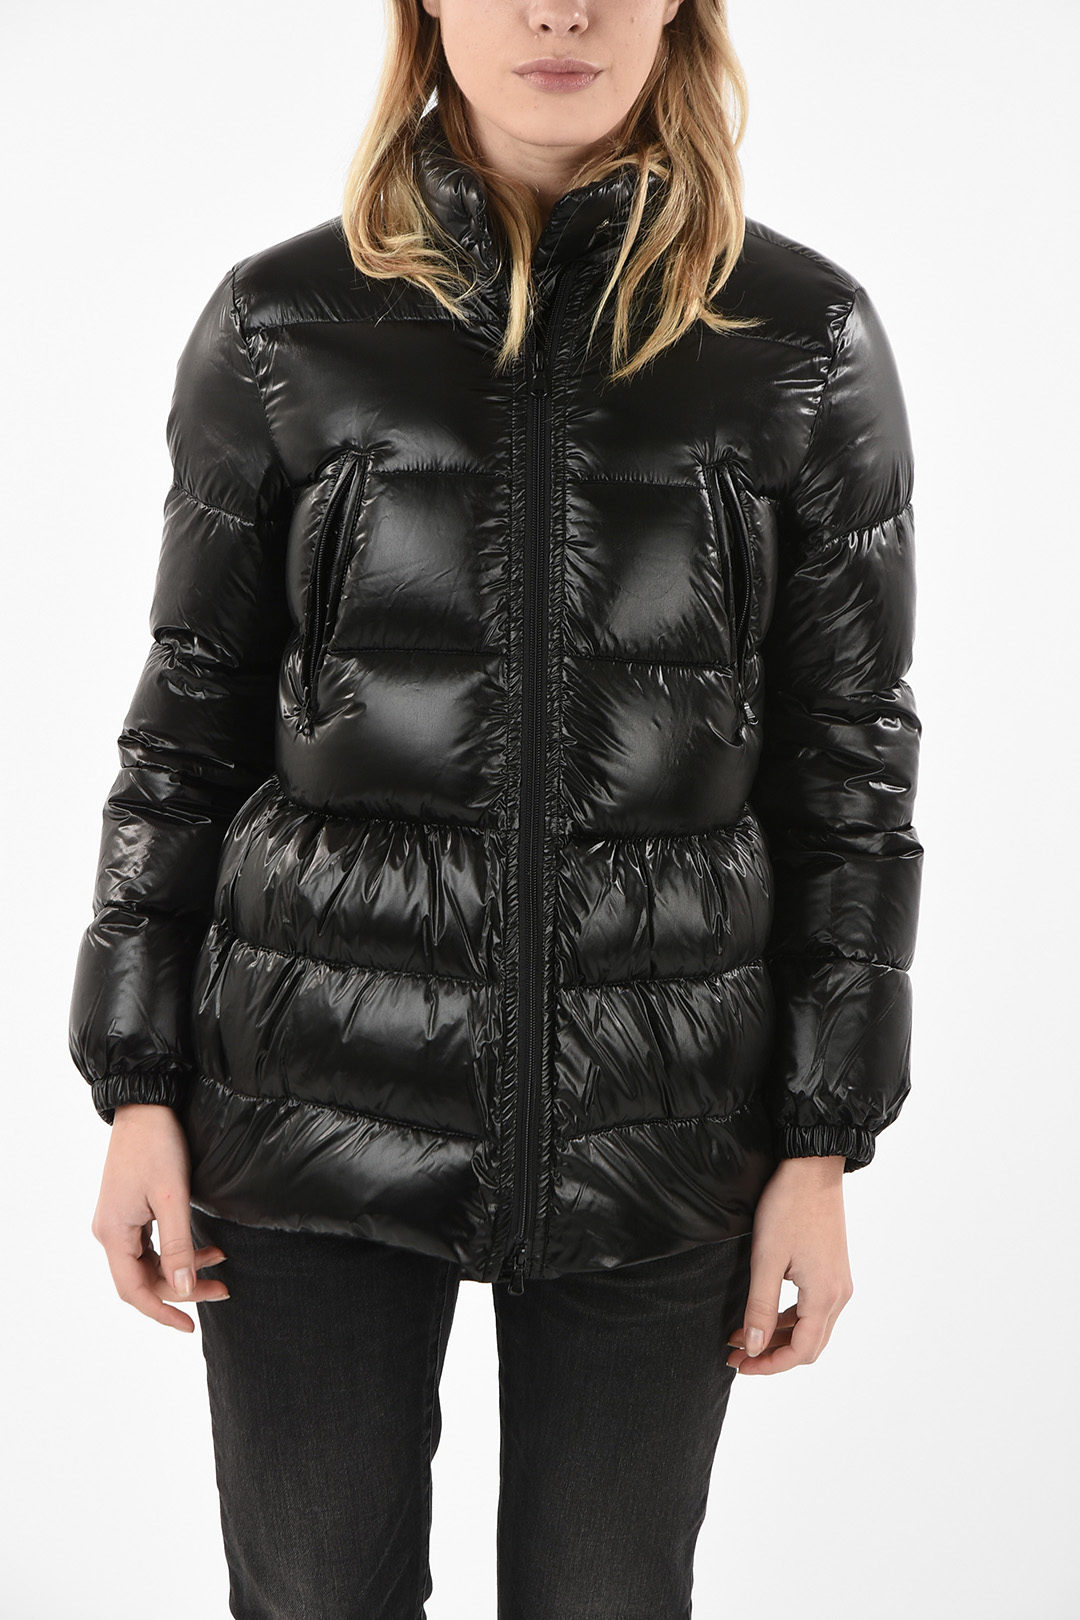 Red Valentino Nylon Quilted Down Jacket women - Outlet